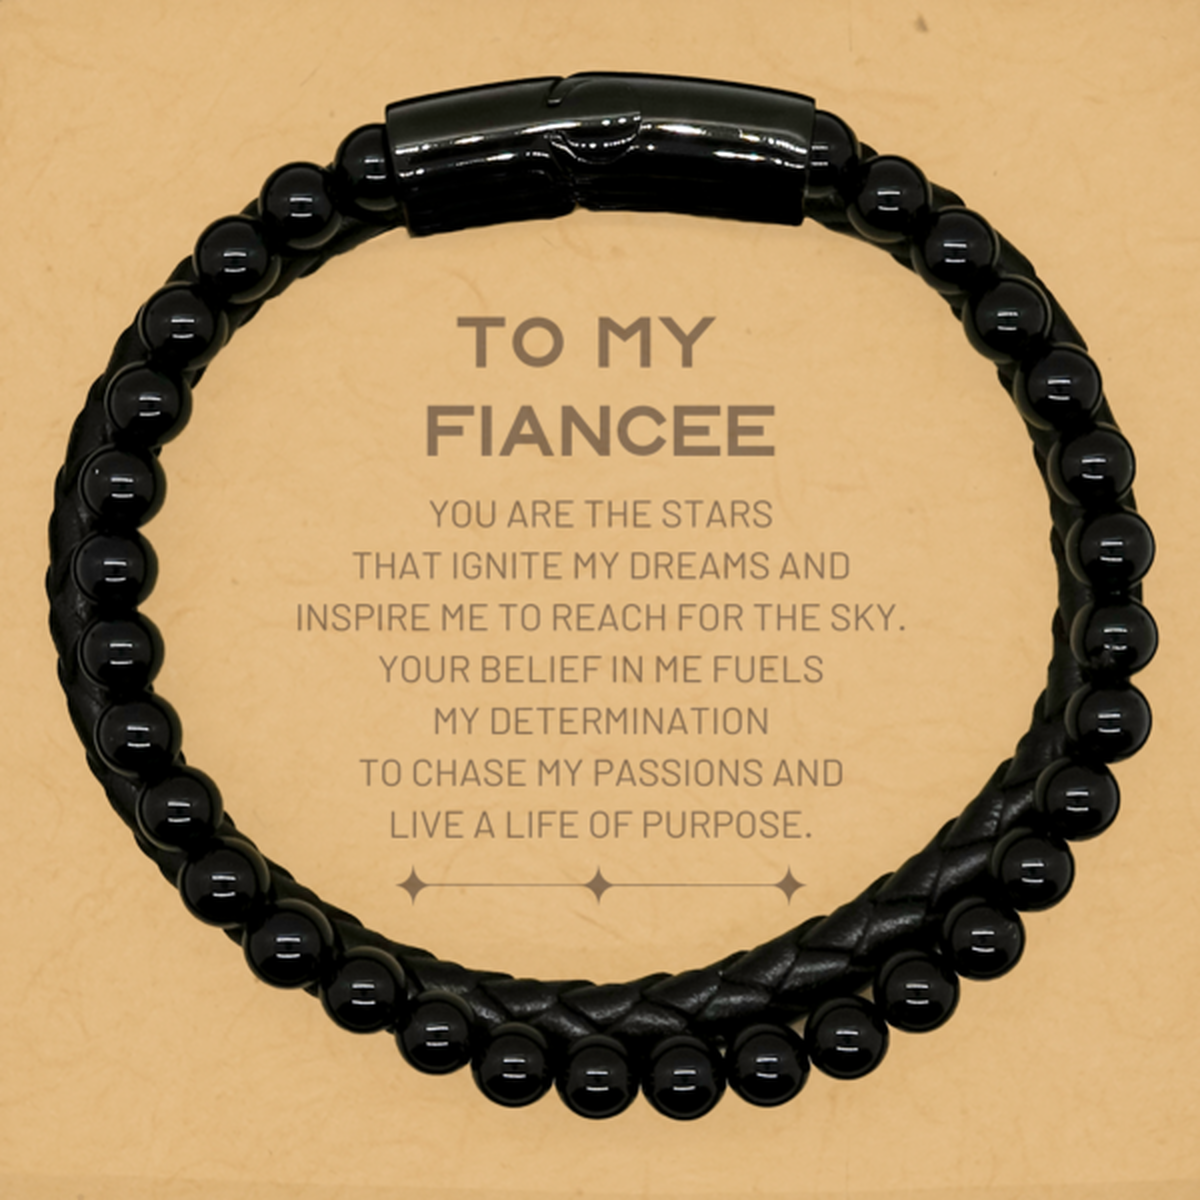 To My Fiancee Stone Leather Bracelets, You are the stars that ignite my dreams and inspire me to reach for the sky, Birthday Unique Gifts For Fiancee, Thank You Gifts For Fiancee